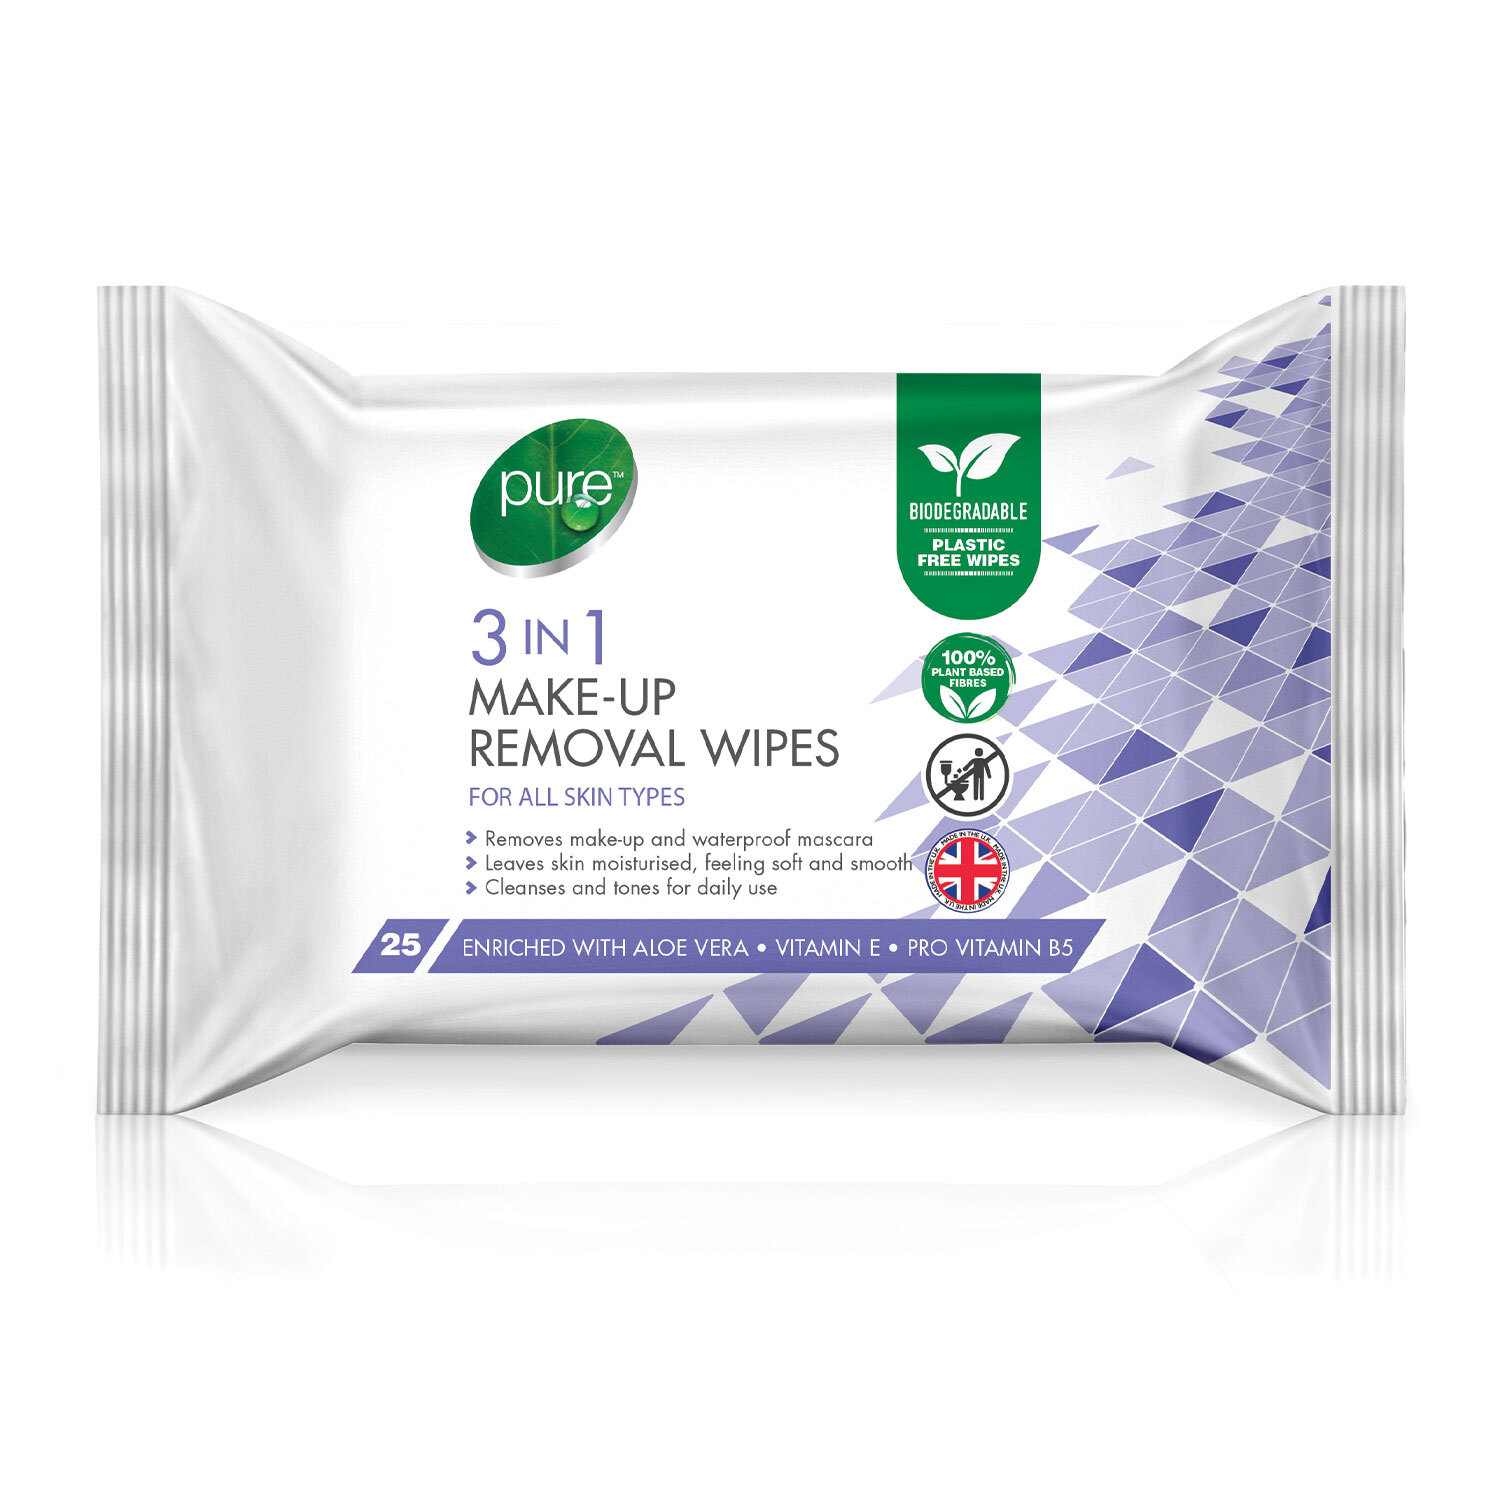 Pure 3-in-1 Make-Up Removal Wipes Image